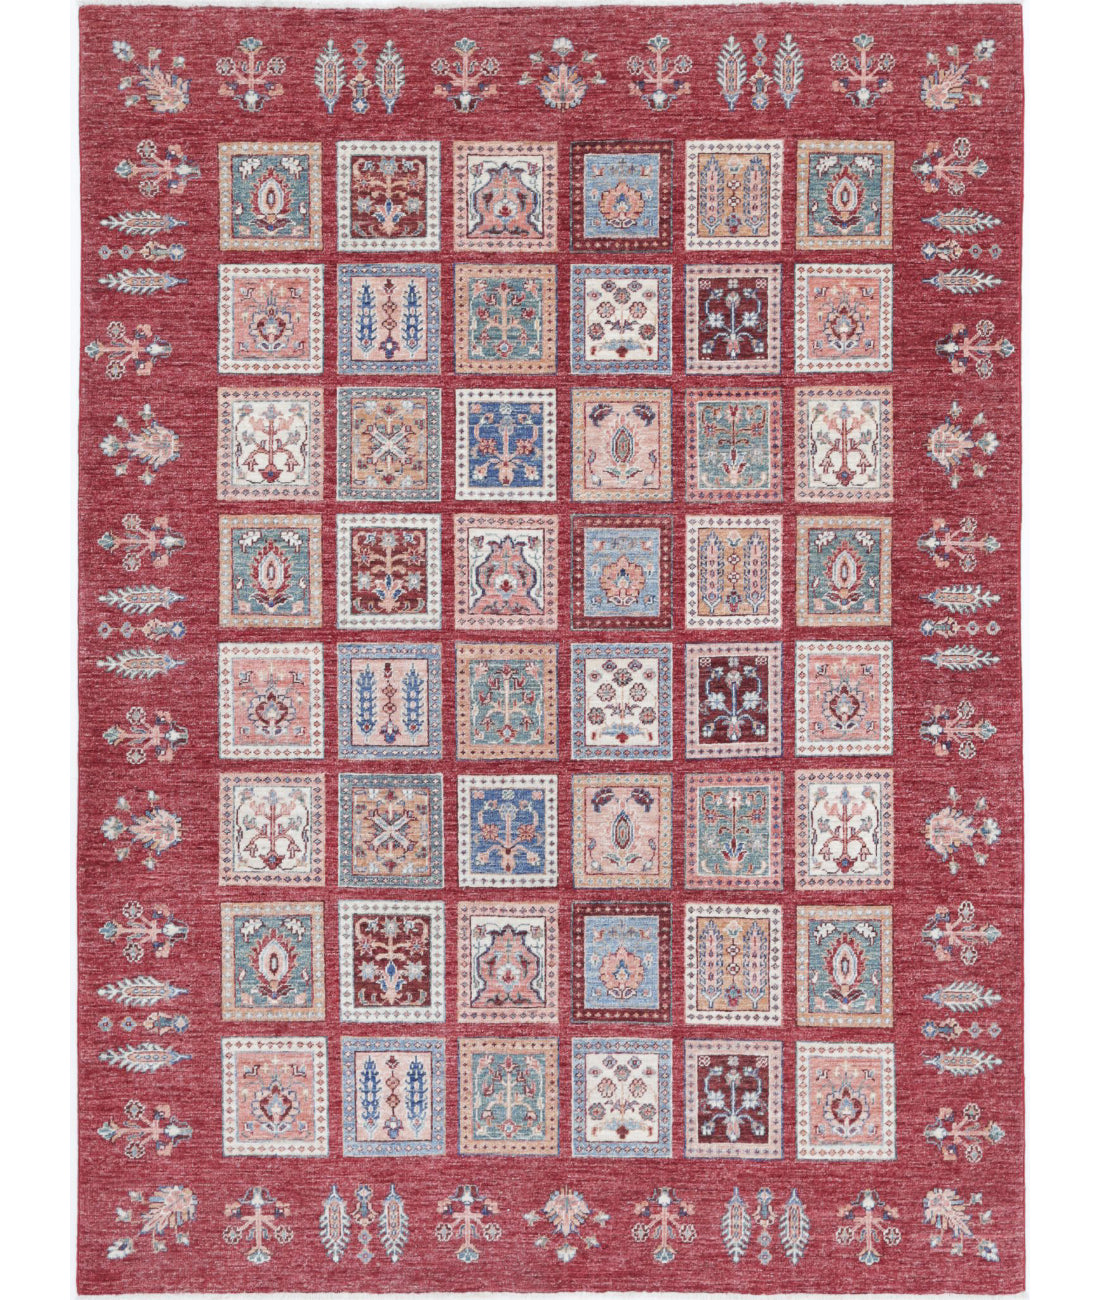 Hand Knotted Bakhtiari Wool Rug - 5'7'' x 7'8'' 5'7'' x 7'8'' (168 X 230) / Red / Red